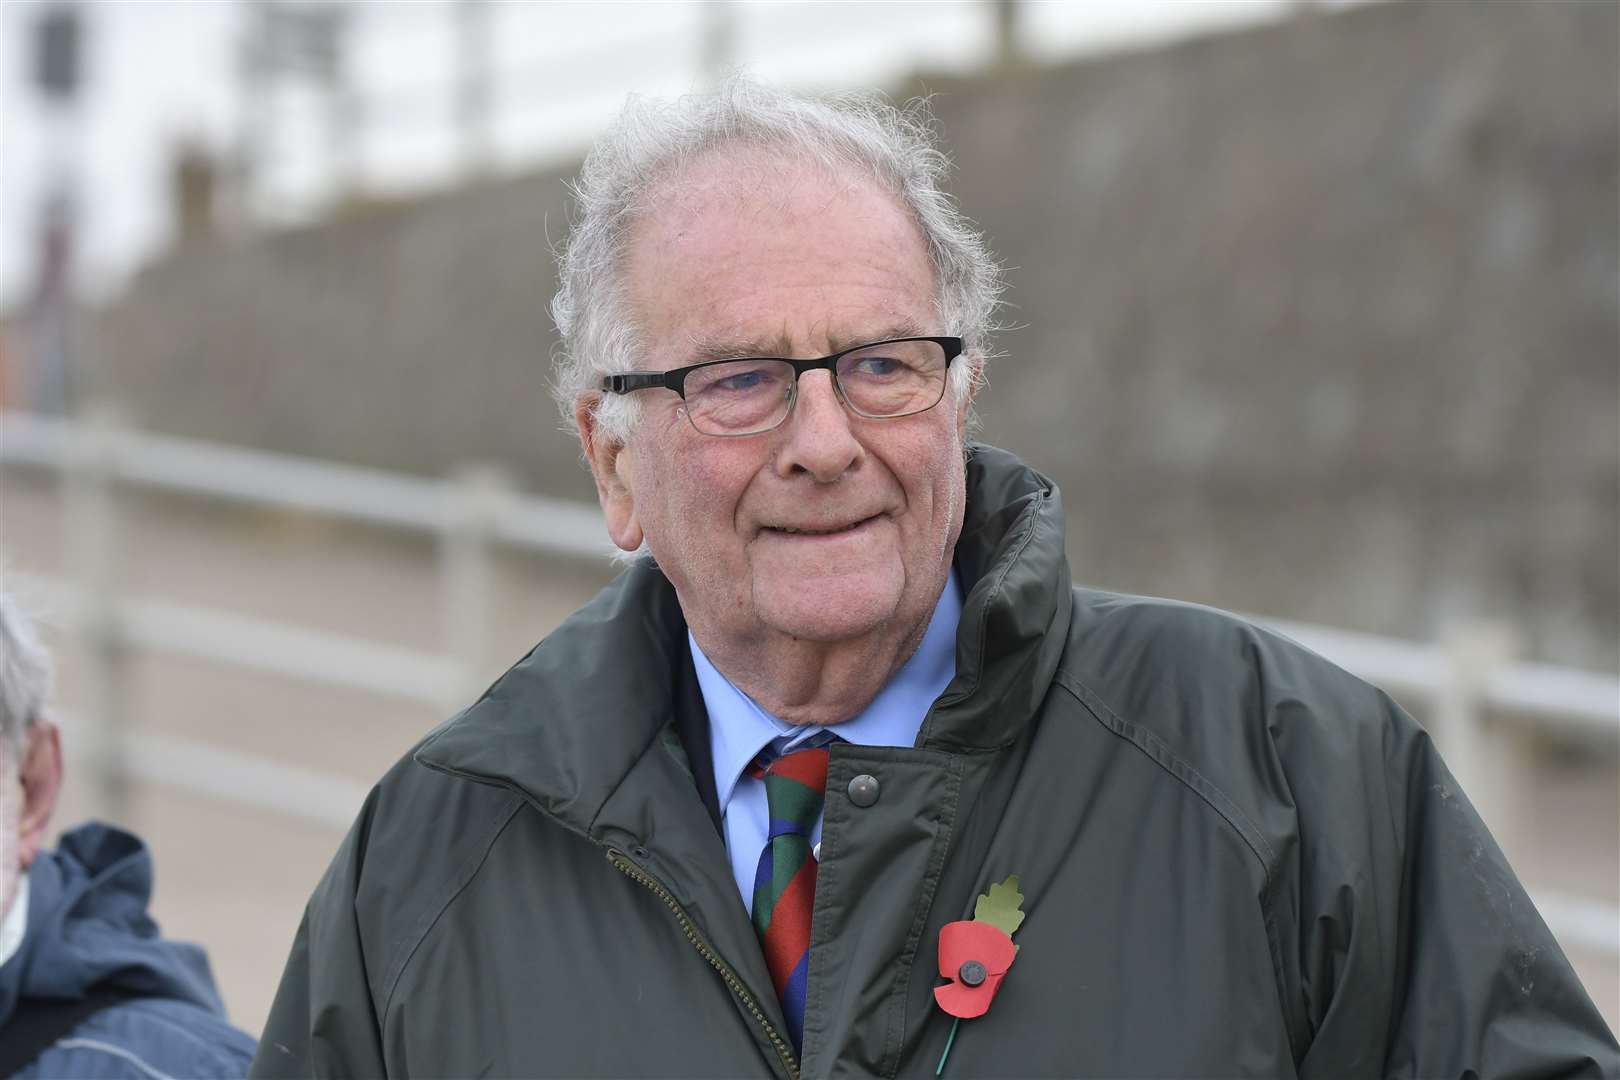 MP for North Thanet, Sir Roger Gale, is pleased to hear there has been a year-on-year reduction in violent crime